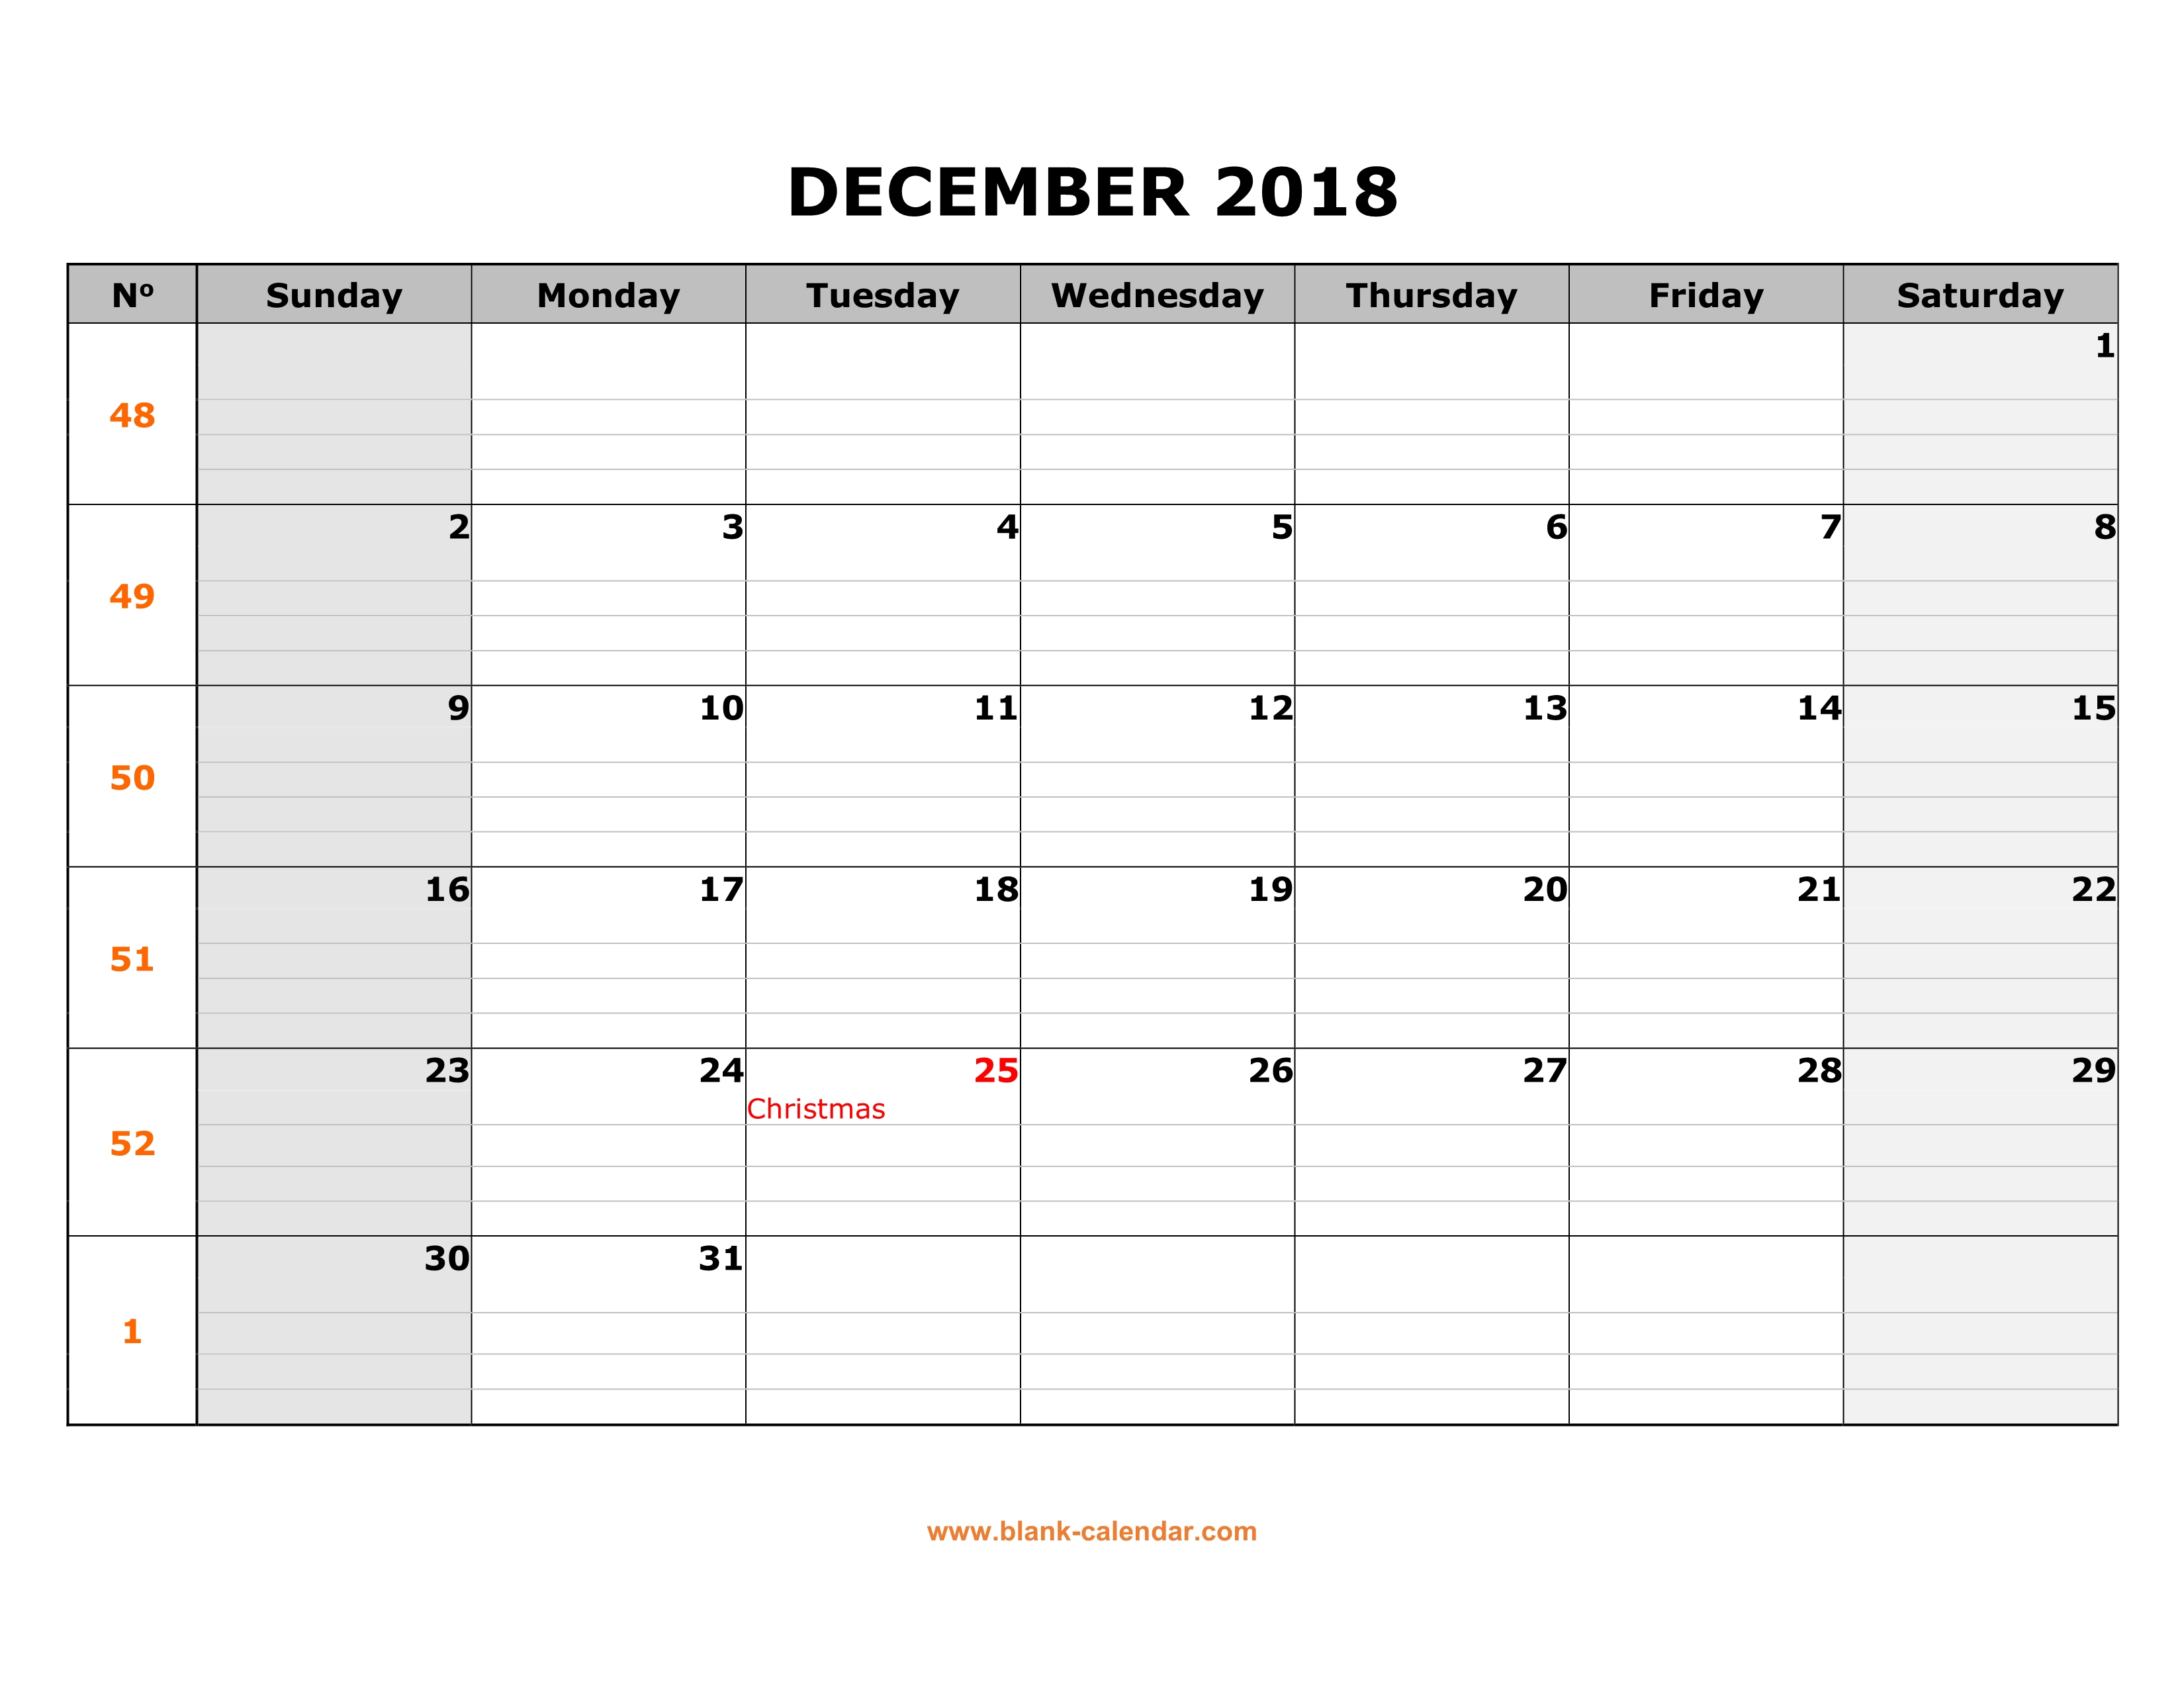 free-download-printable-december-2018-calendar-large-box-grid-space-for-notes